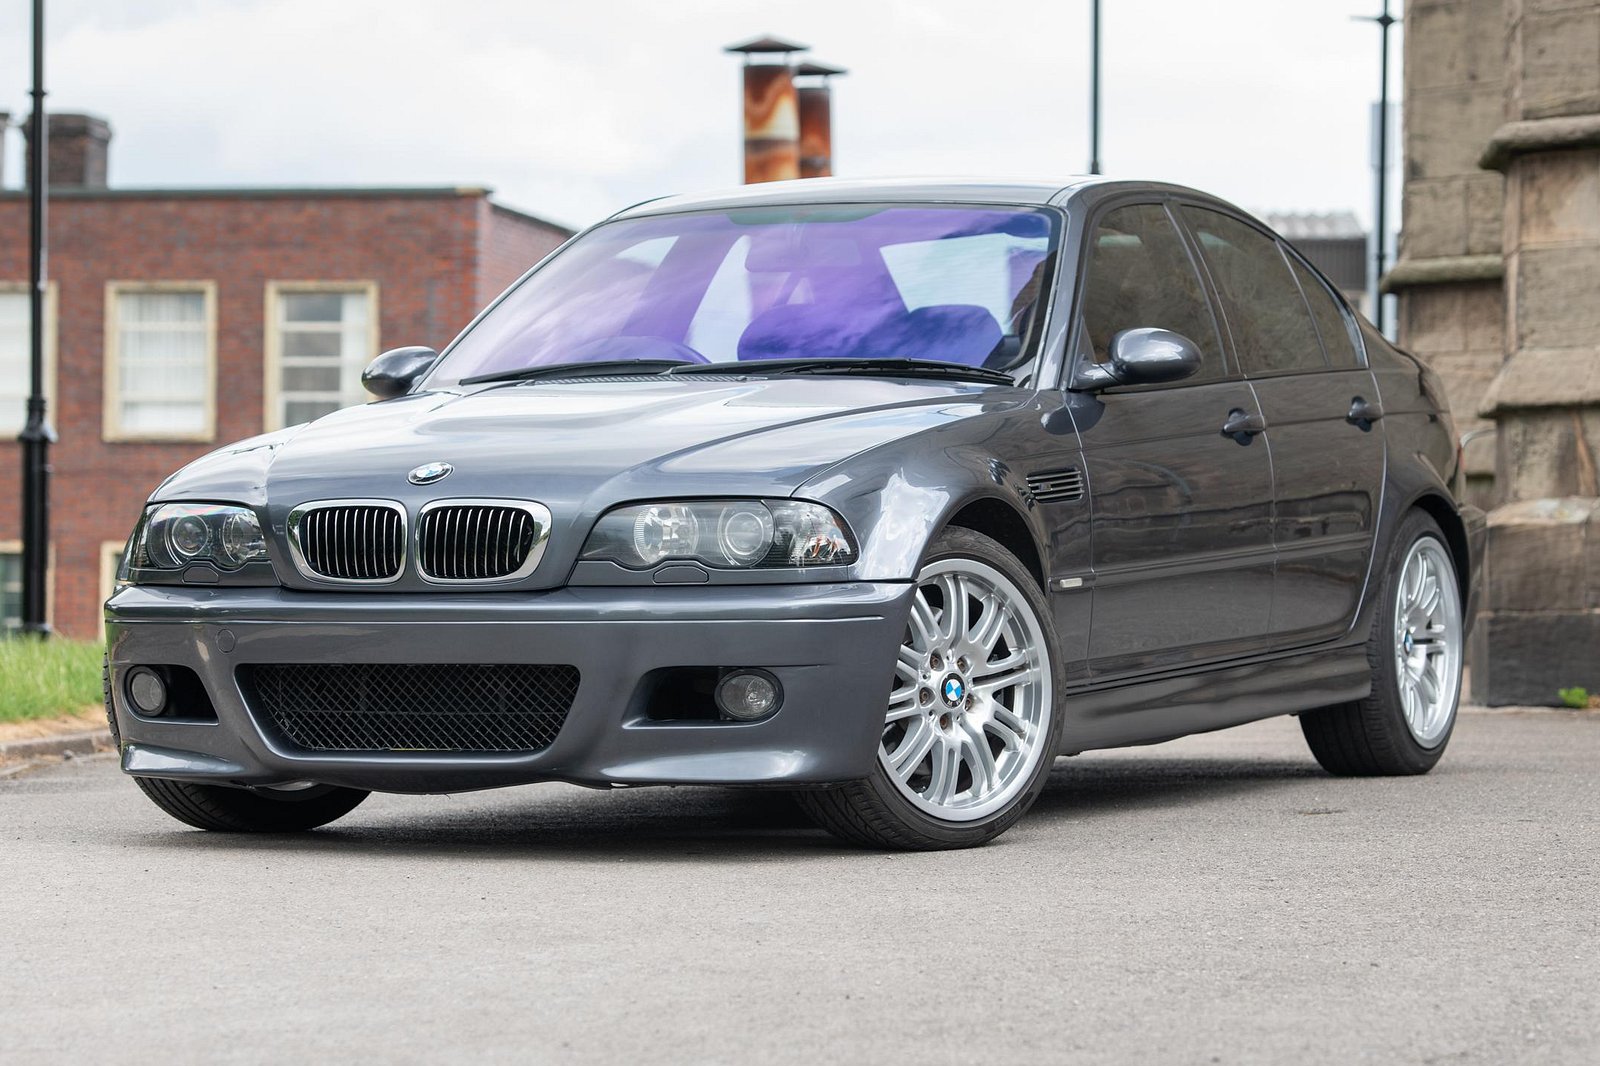 This BMW E46 M3 sedan conversion could also come from BMW!